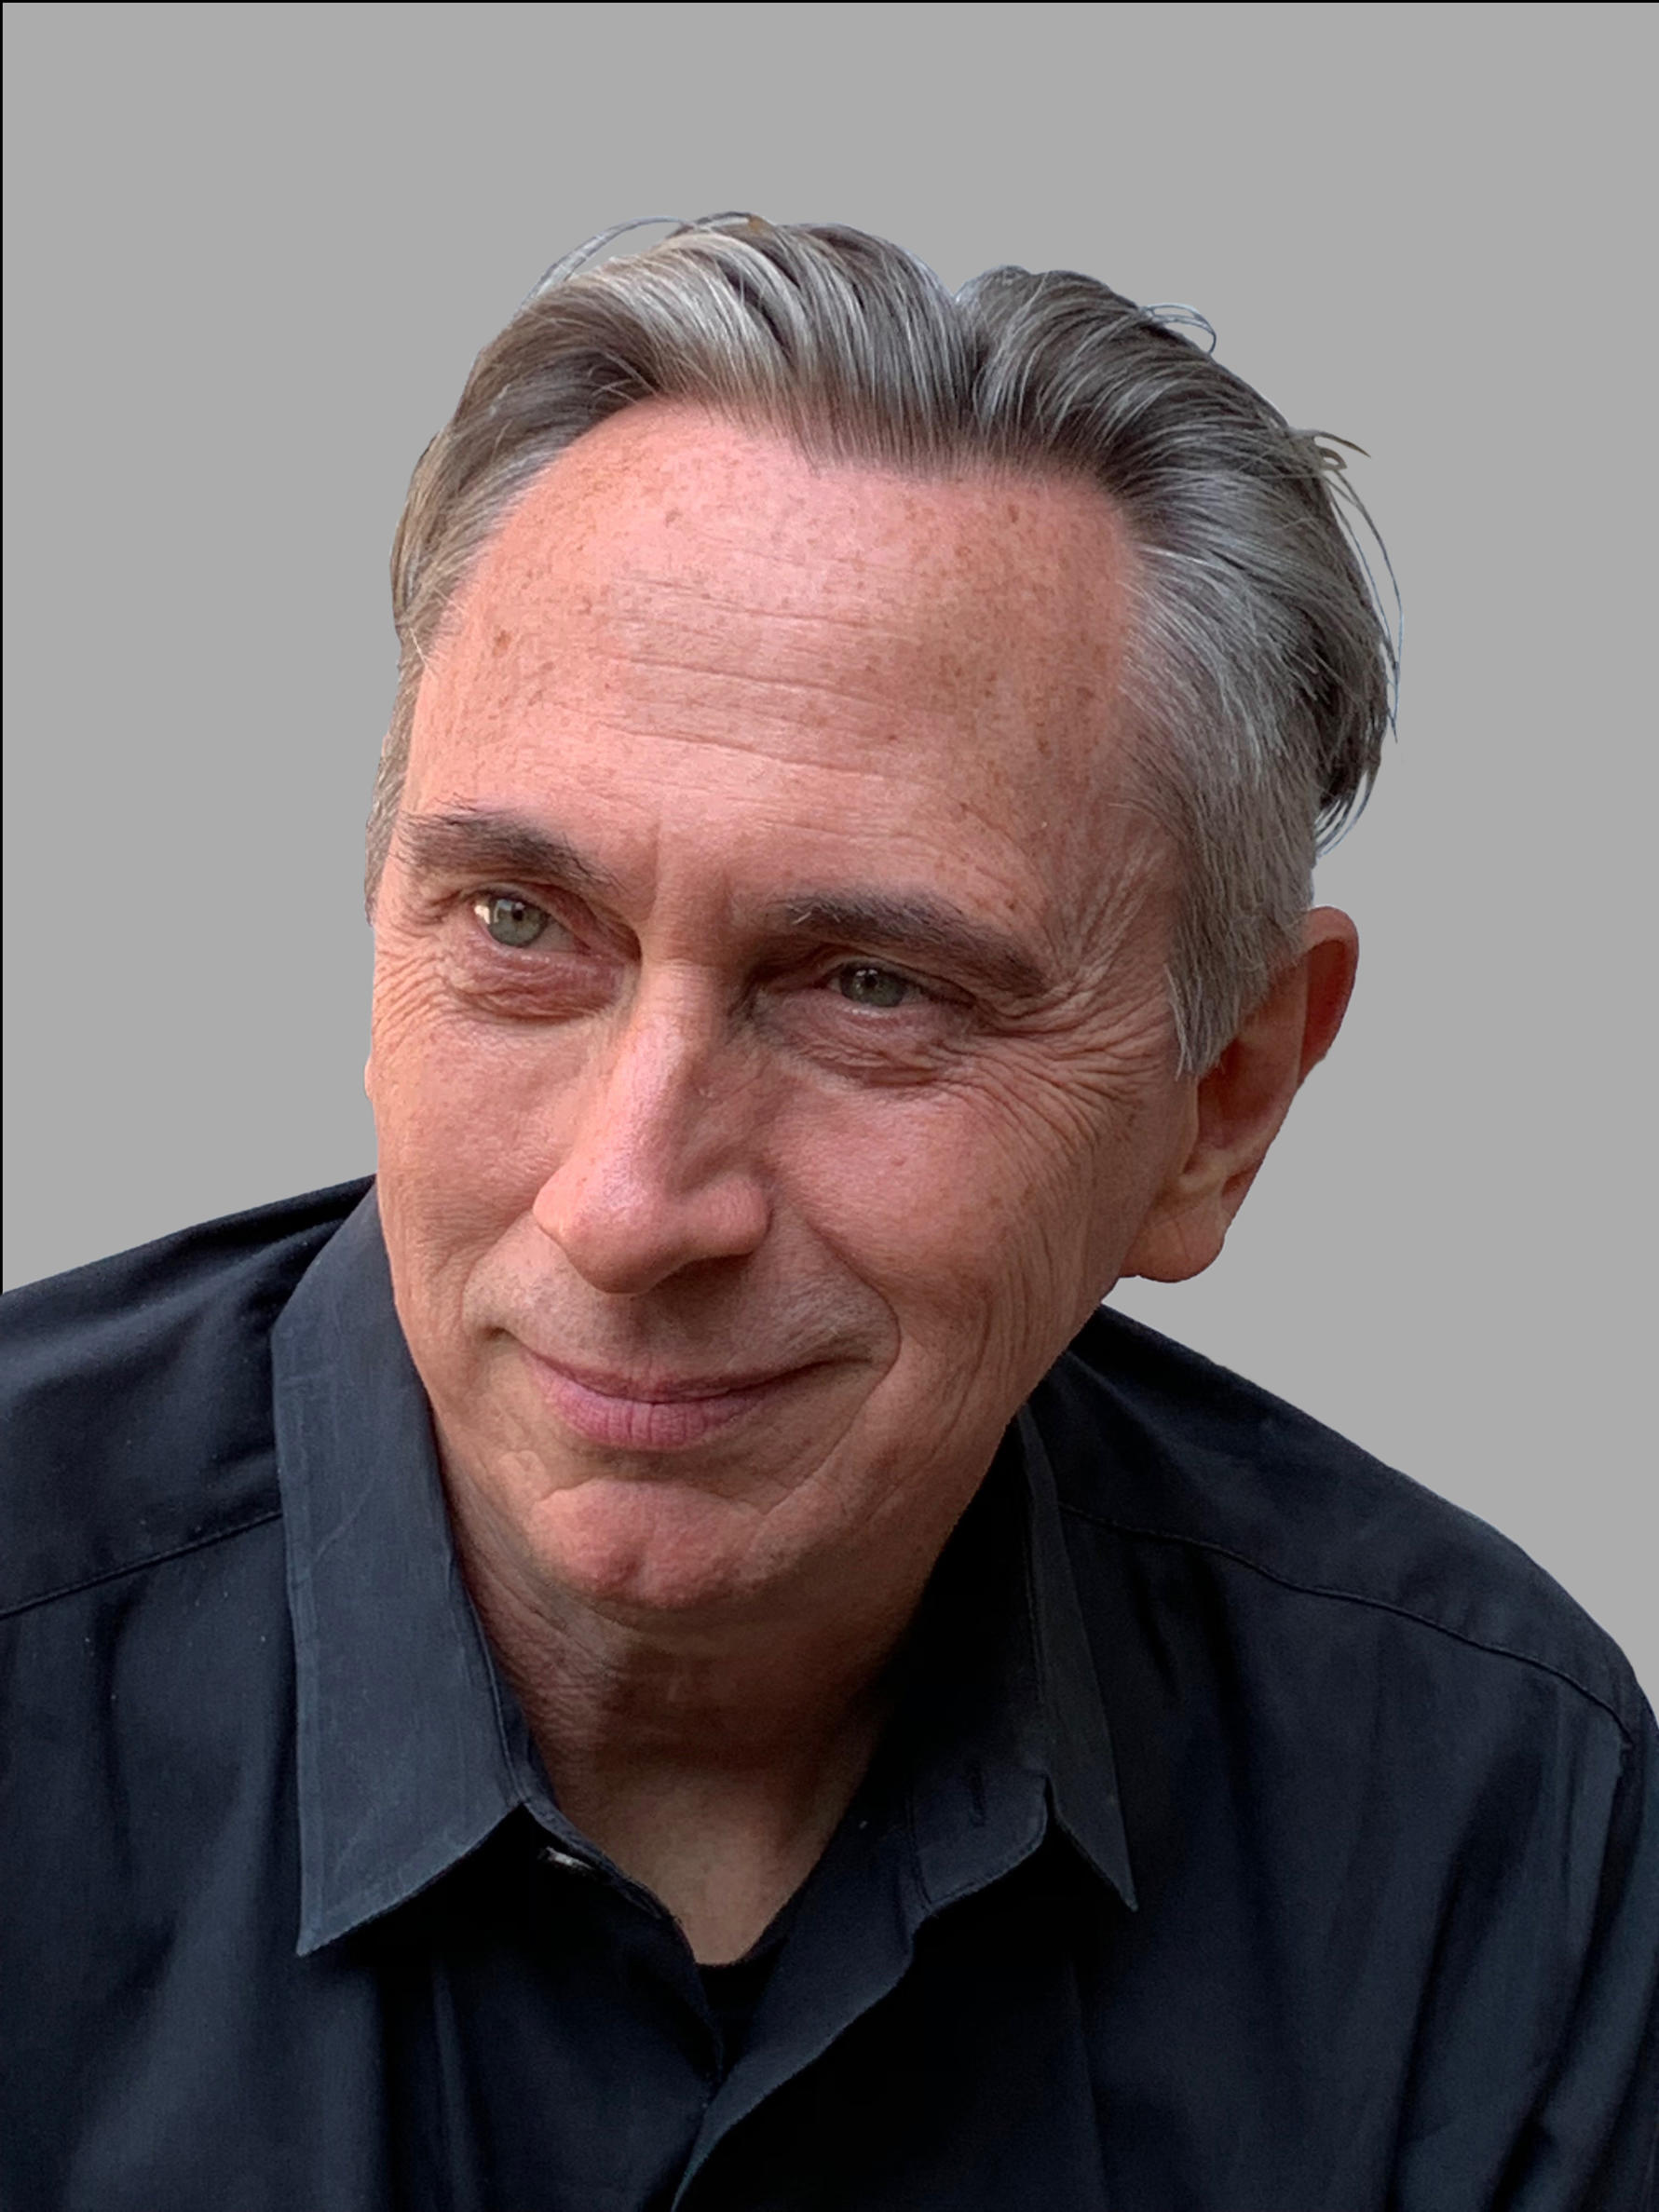 Head shot of a man with grey hair looking to the right with a grey shirt